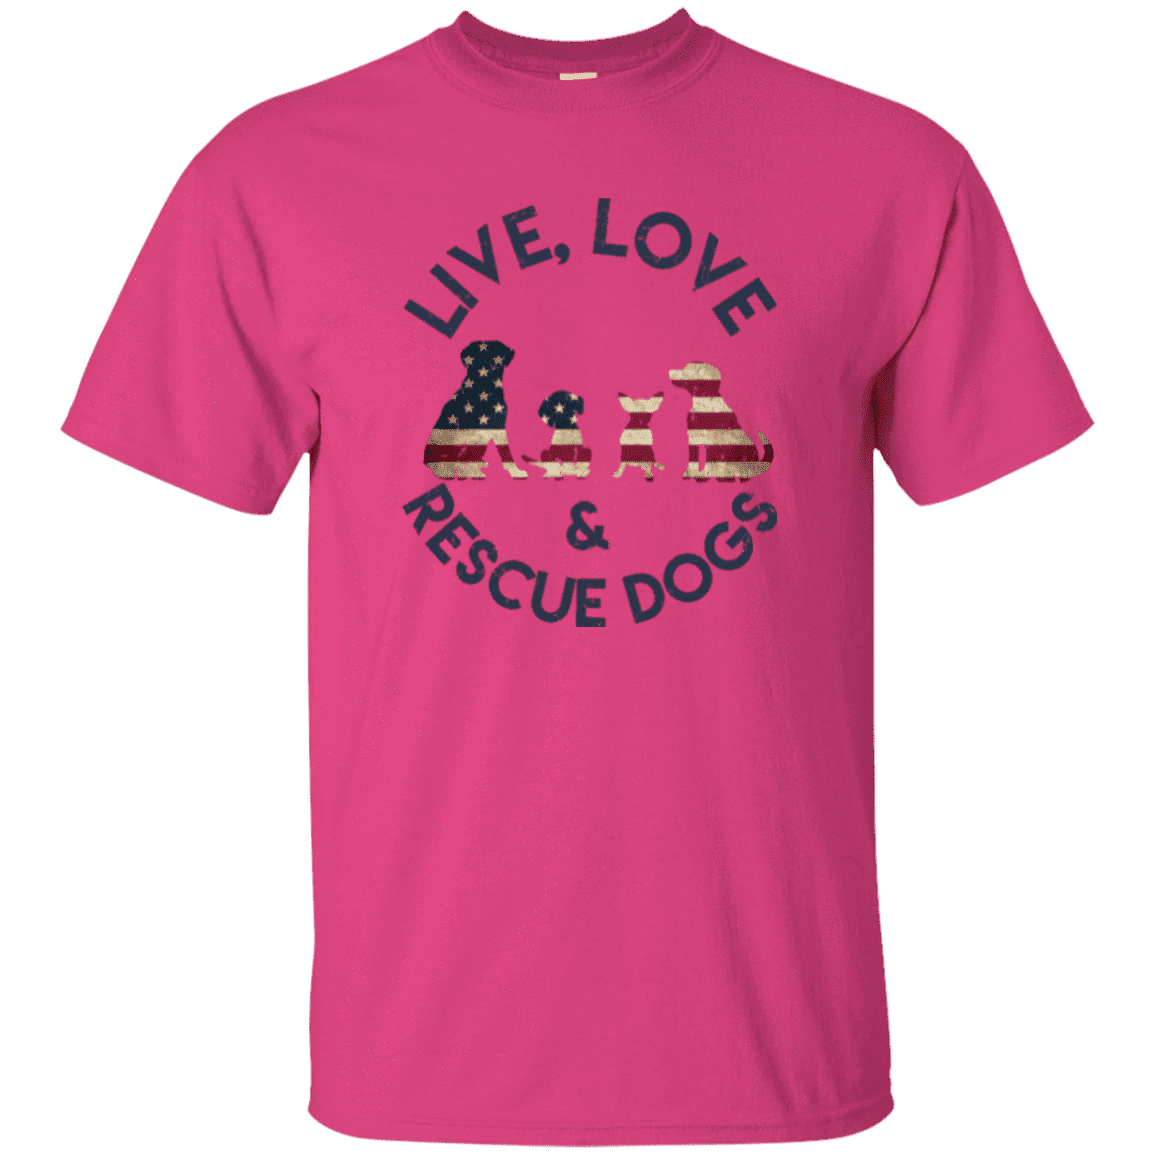 Live Love and Rescue Dogs - T Shirt.